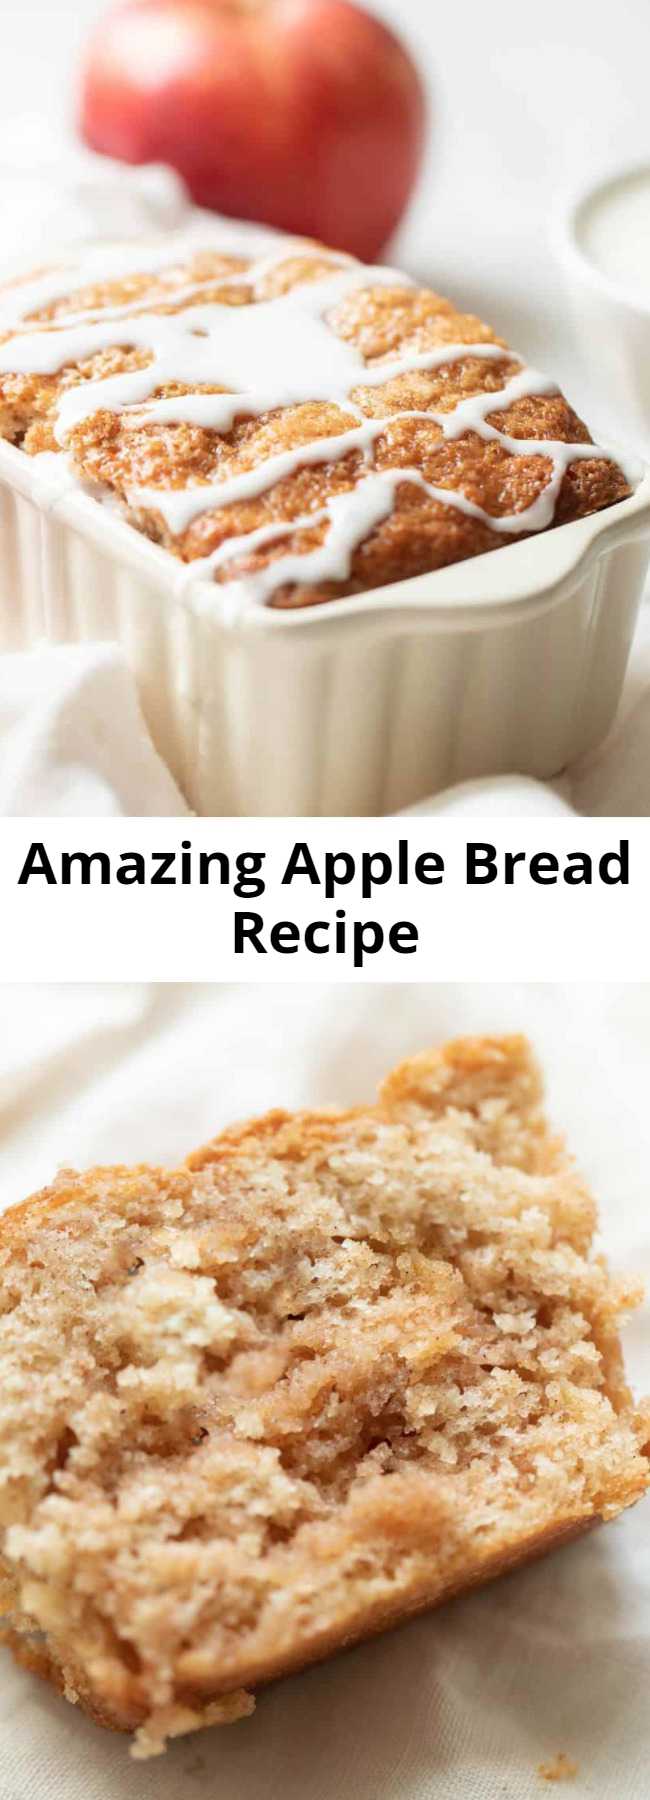 Amazing Apple Bread Recipe - This apple cinnamon bread recipe yields 6 mini loaves, making it great for both indulging and gifting! It’s a foolproof no yeast quickbread that takes just 10 minutes from mixer to oven requires only staple ingredients. How is that for easy fall flavor? #applebread #sweetbread #apple #bread #applecinnamonbread #cinnamon #fall #fallrecipe